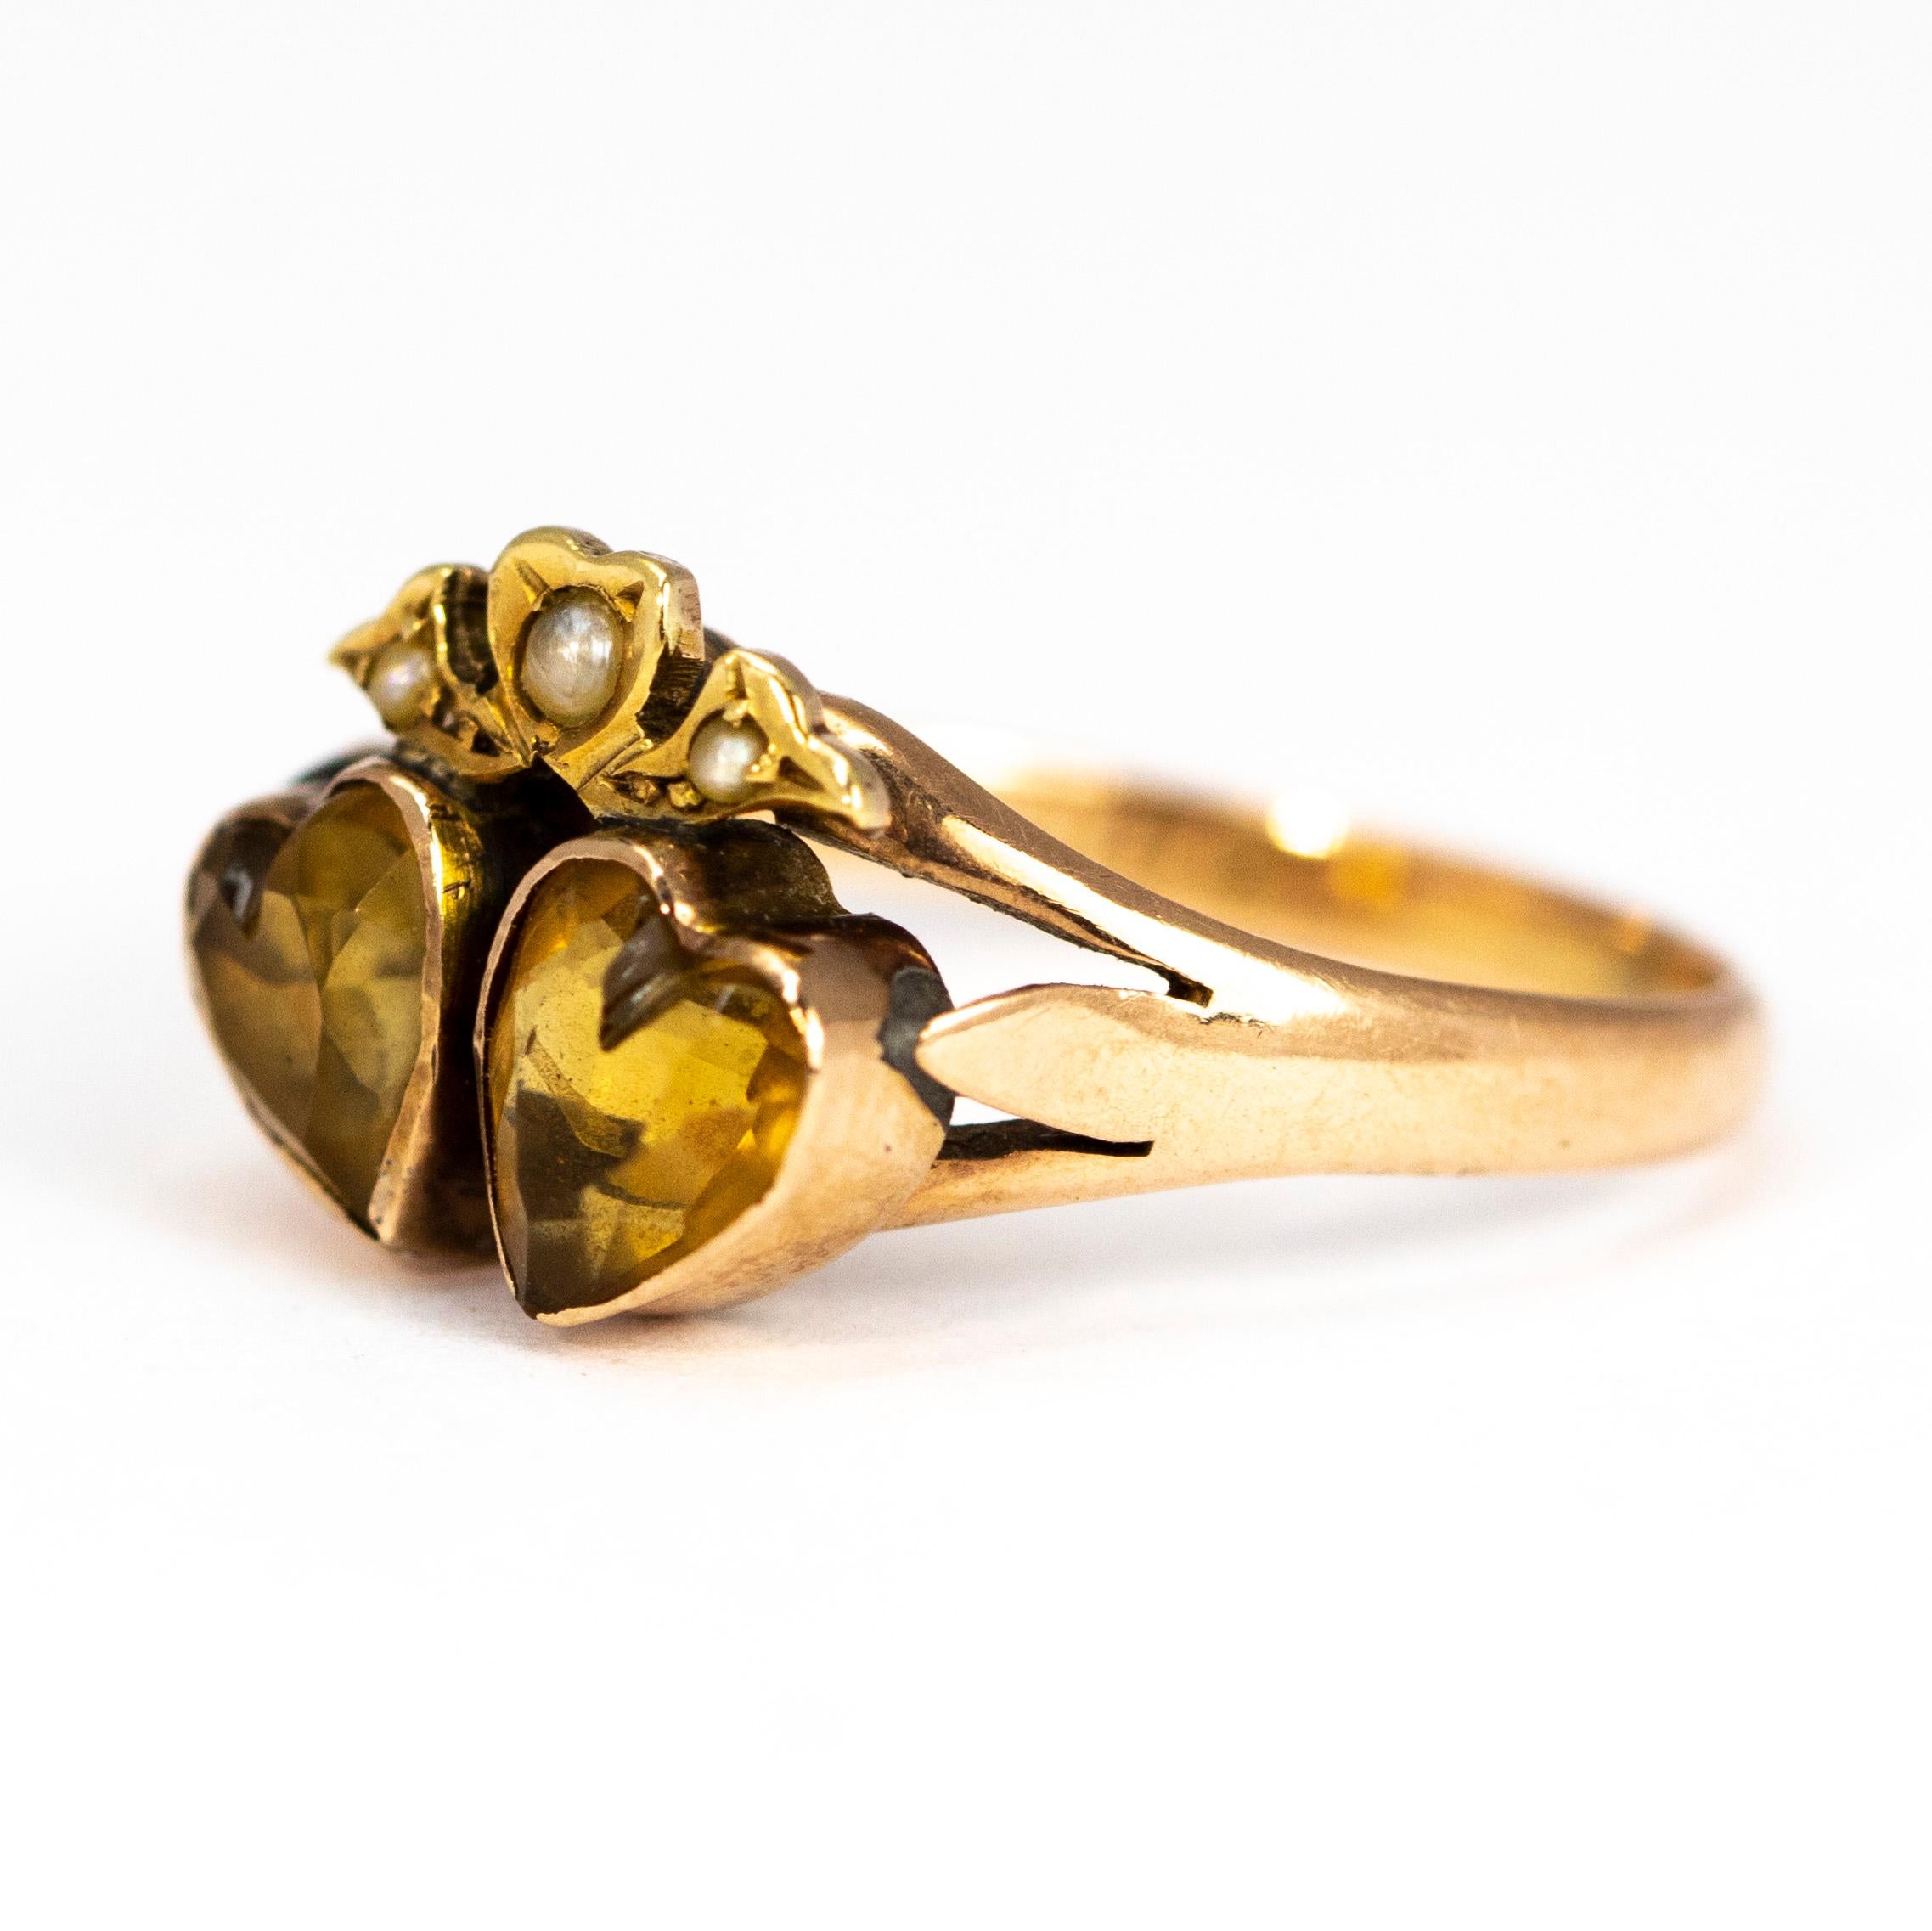 The design of this ring is just lovely with two heart shaped citrine stones set in fine 9ct gold. Above the double hearts is further heart and ribbon detail set with seed pearls. 

Ring Size: M 1/2 or 6 1/2 
Heart Dimensions: 6.5 x 6mm 

Weight: 2.5g